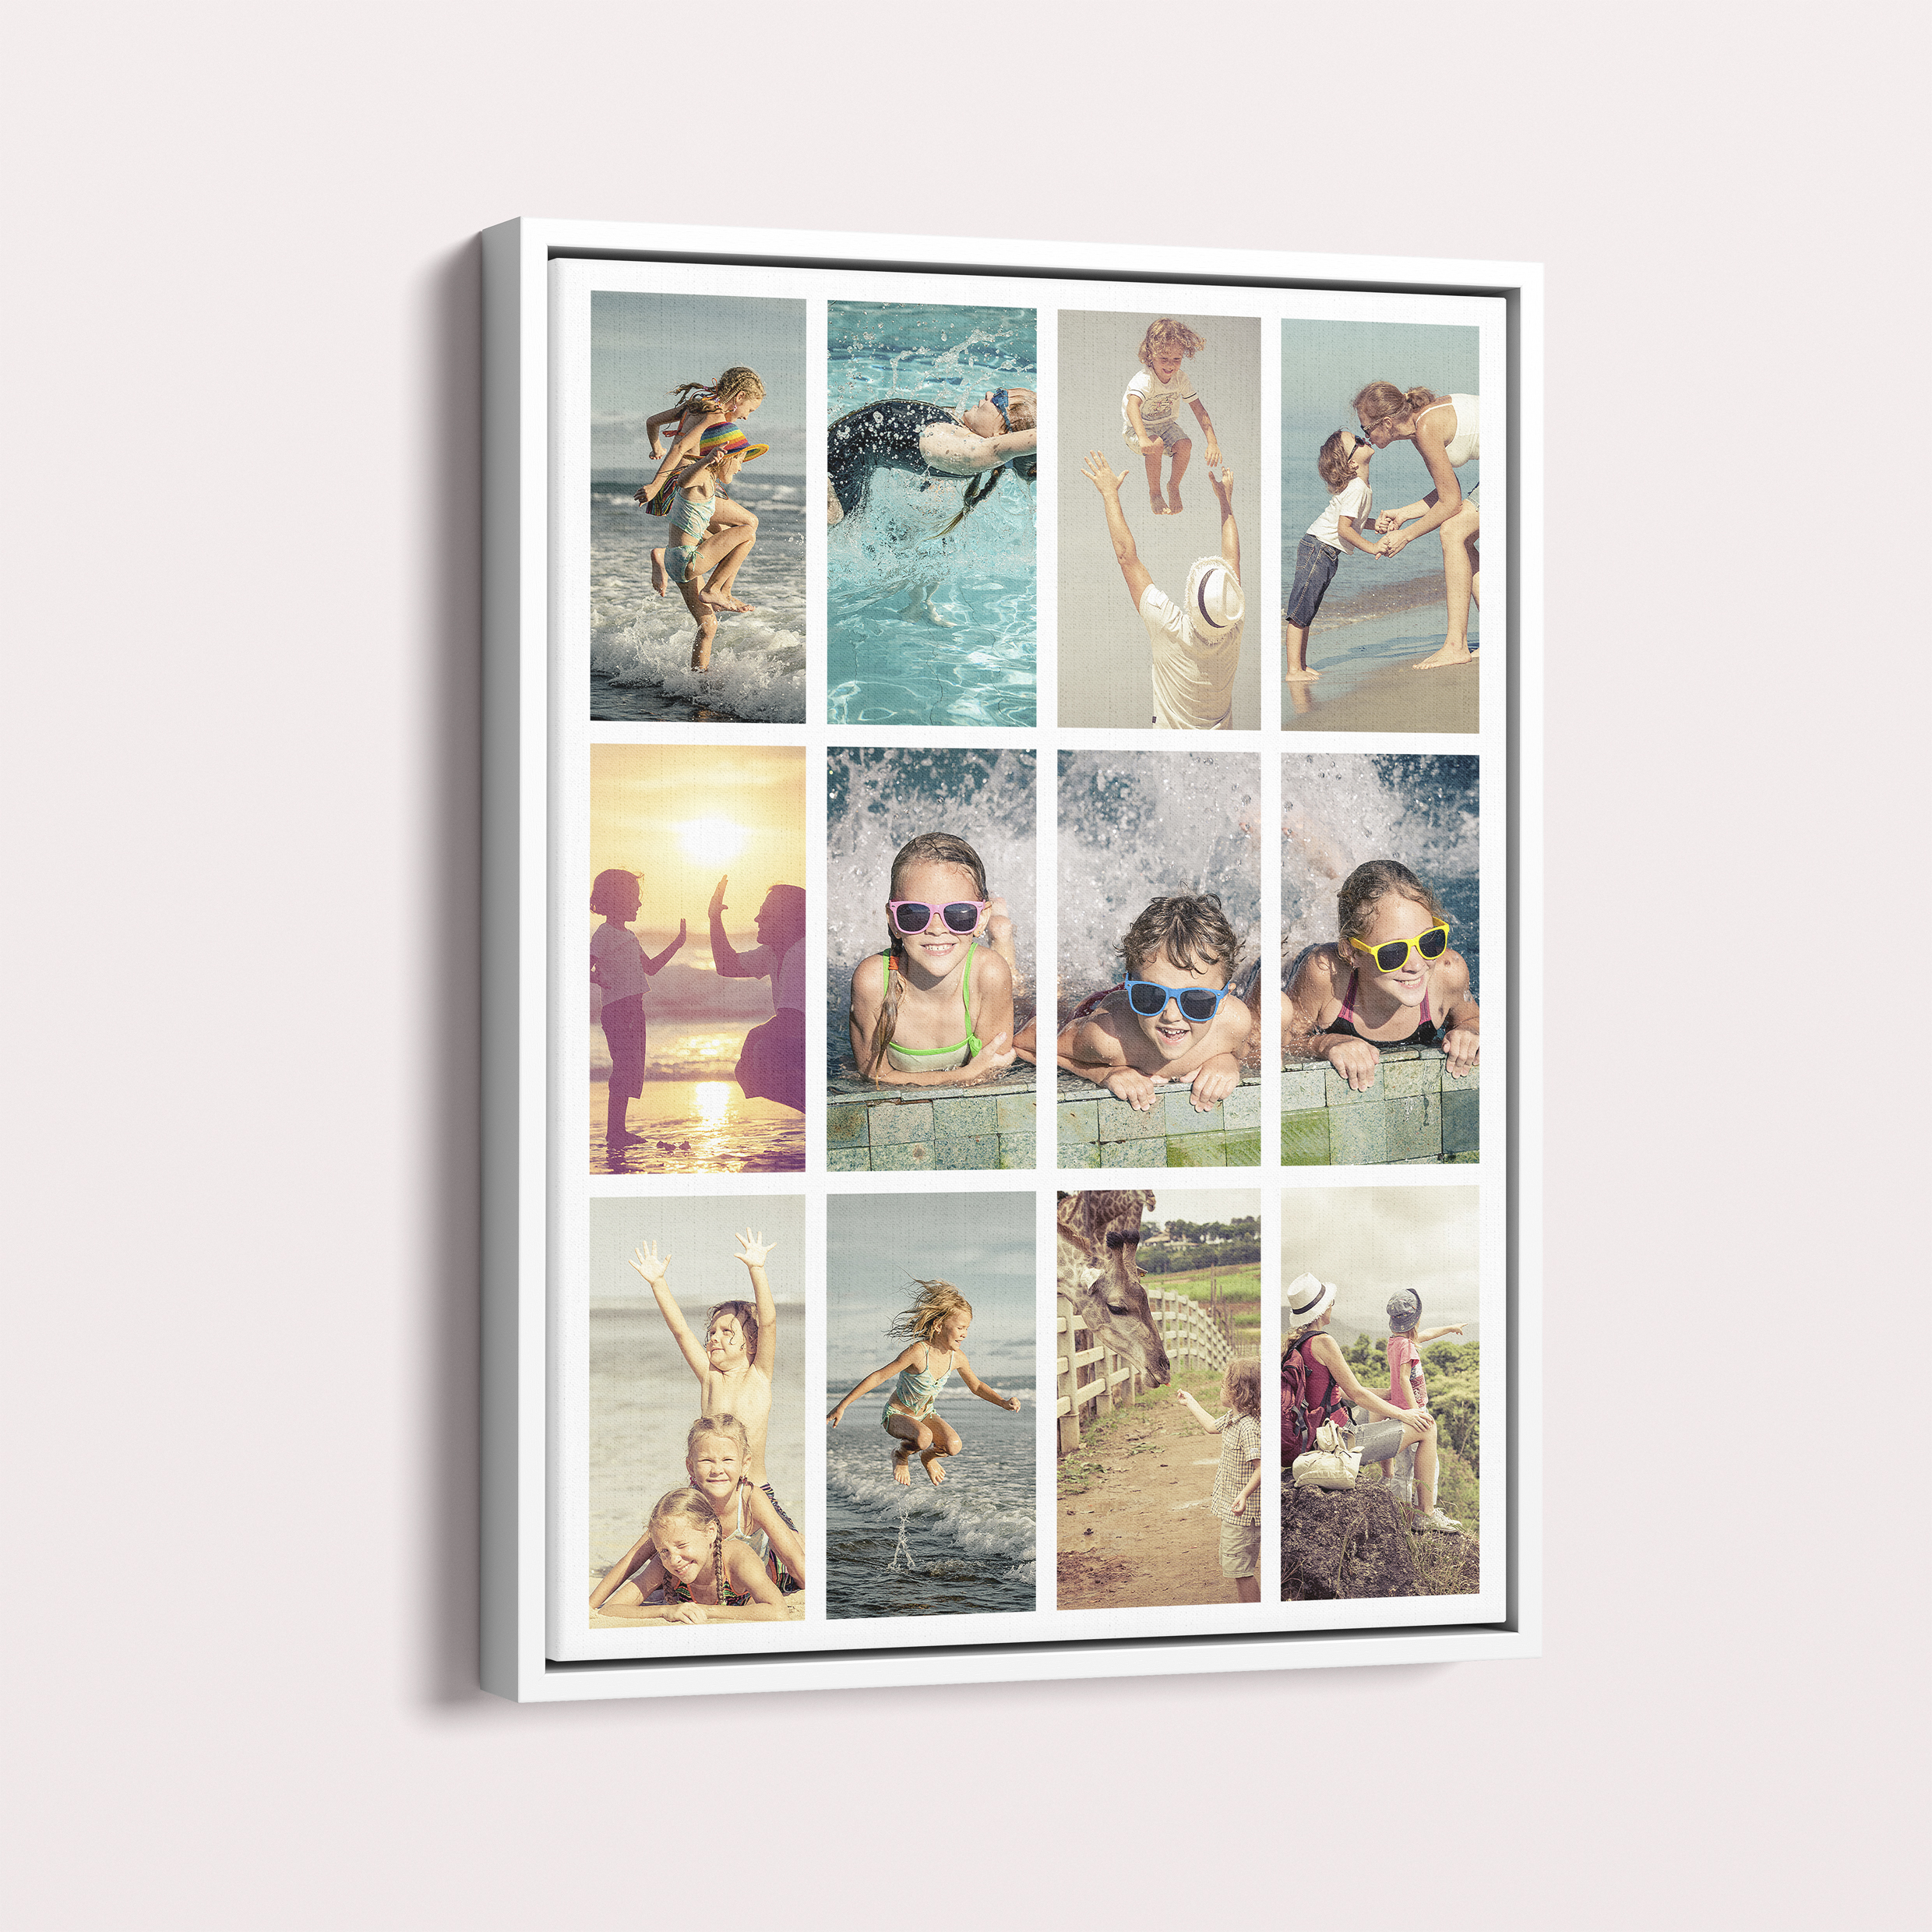  Personalized Cinematic Snapshot Framed Photo Canvases - Elegant Showcase for Your Cherished Photo Collection